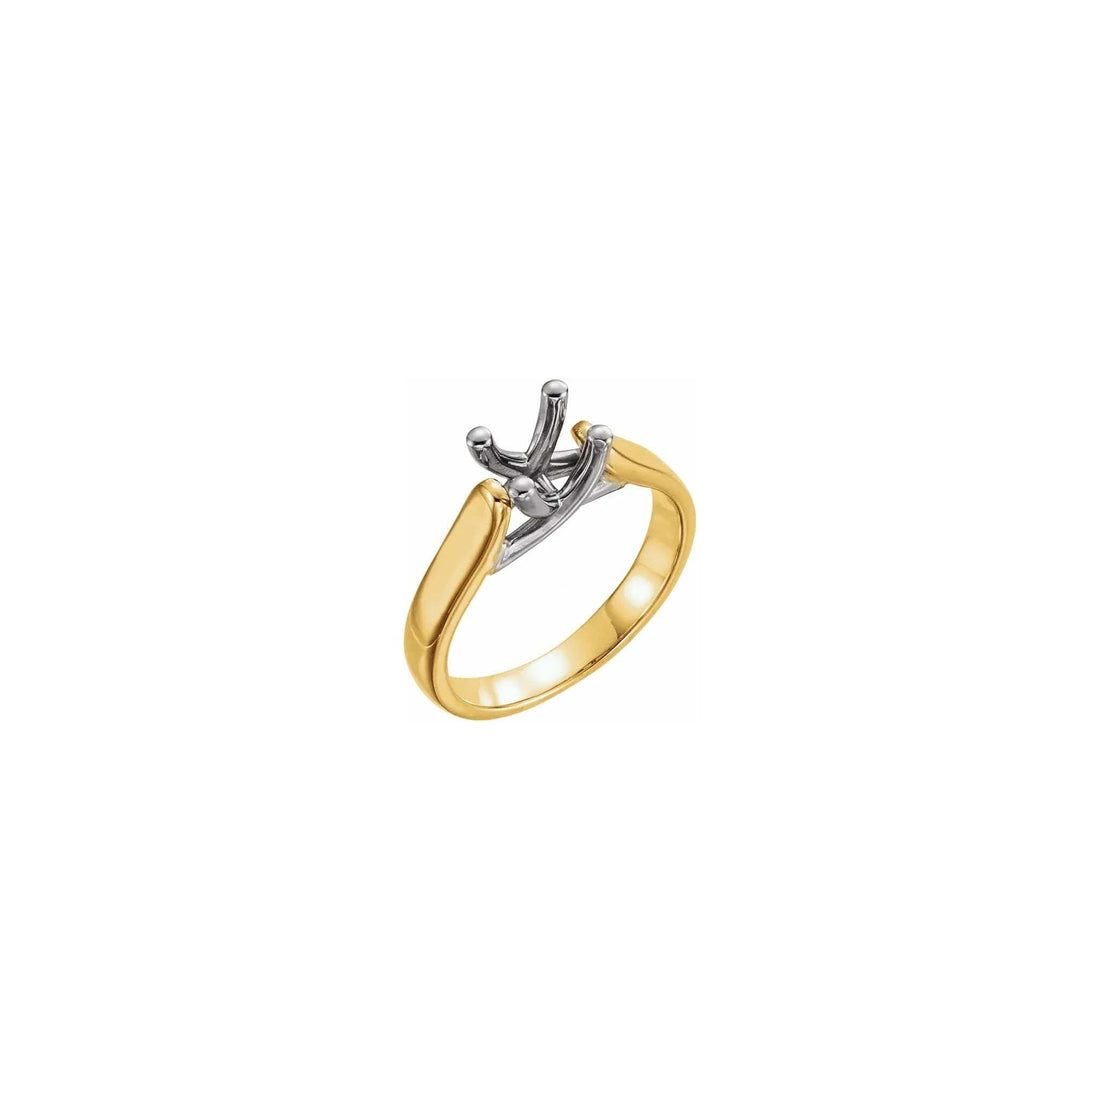 14k Yellow/White Gold Solitaire Engagement Ring Mounting - Skeie's Jewelers